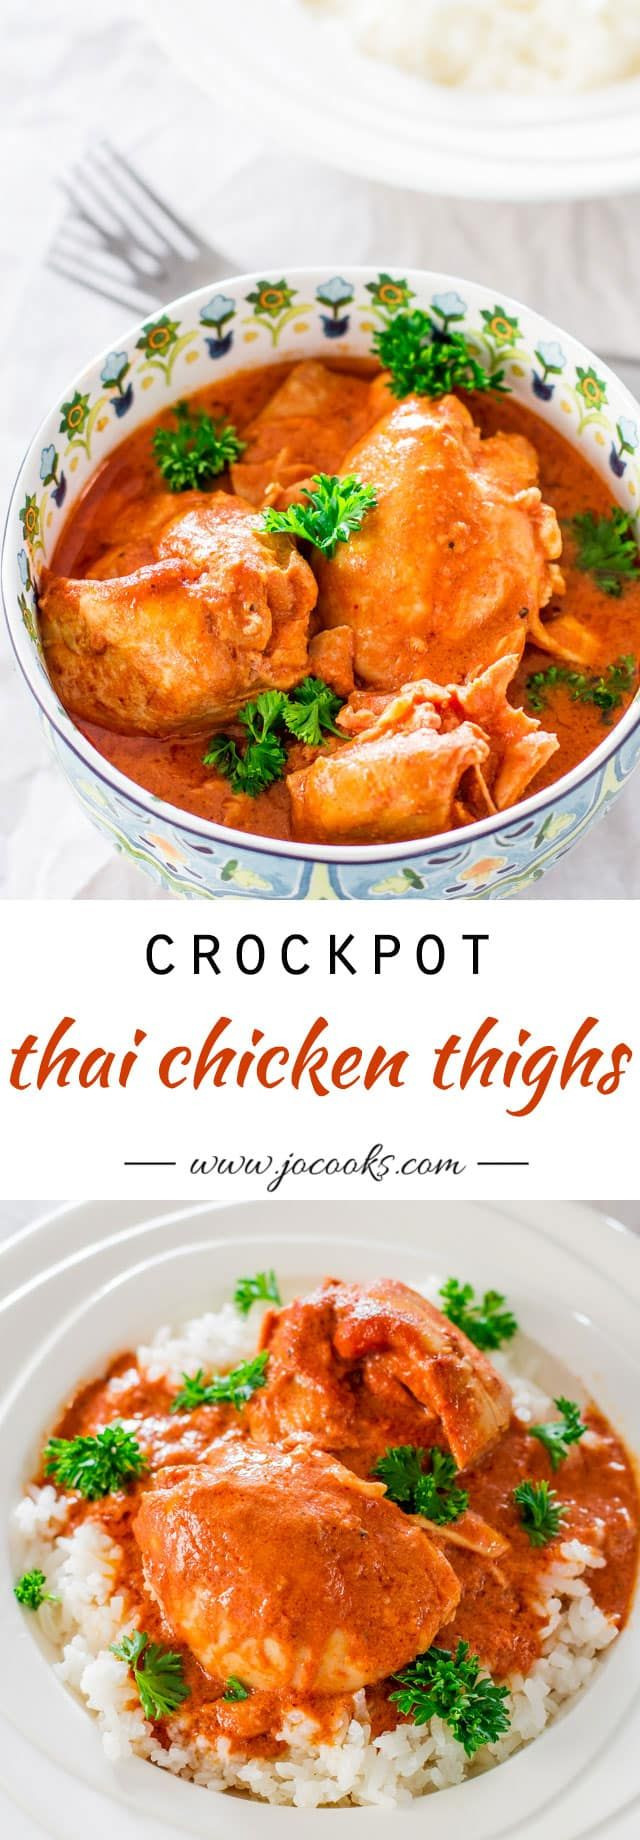 Chicken Thighs Crockpot Keto
 The 25 Best Keto Slow Cooker Recipes of All Time